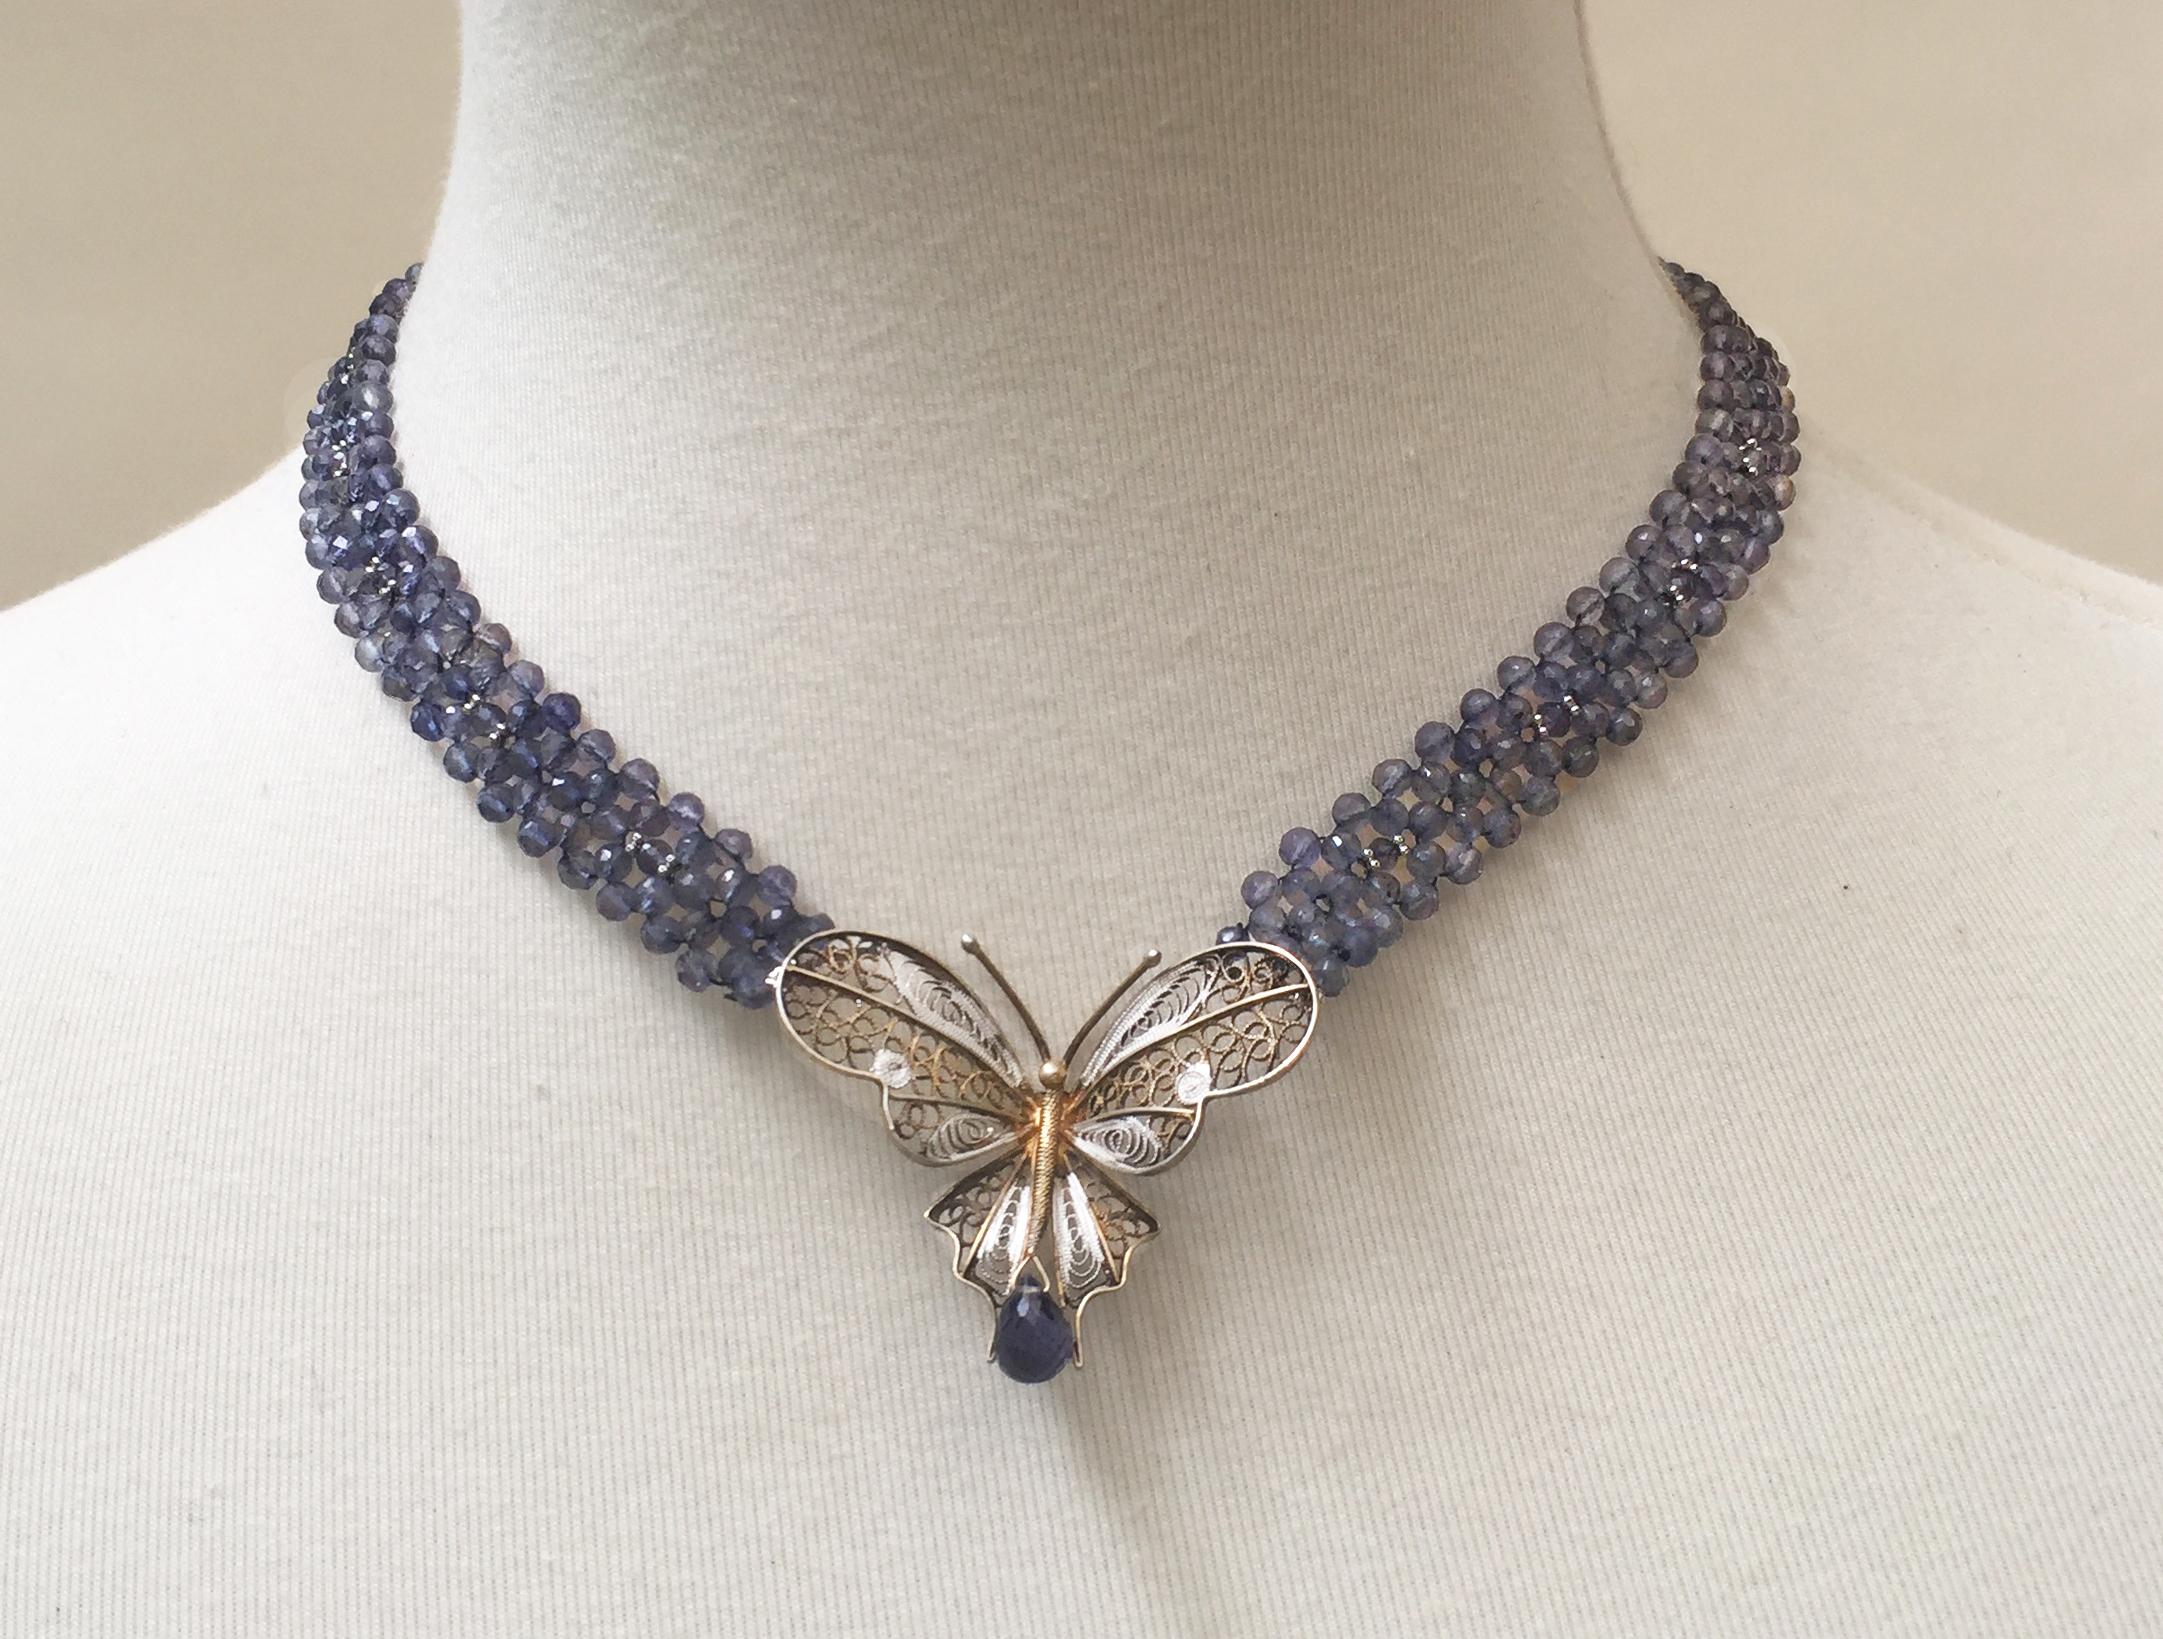 Women's Marina J. Vintage Butterfly on Woven Iolite Beaded Necklace with 14k White Gold